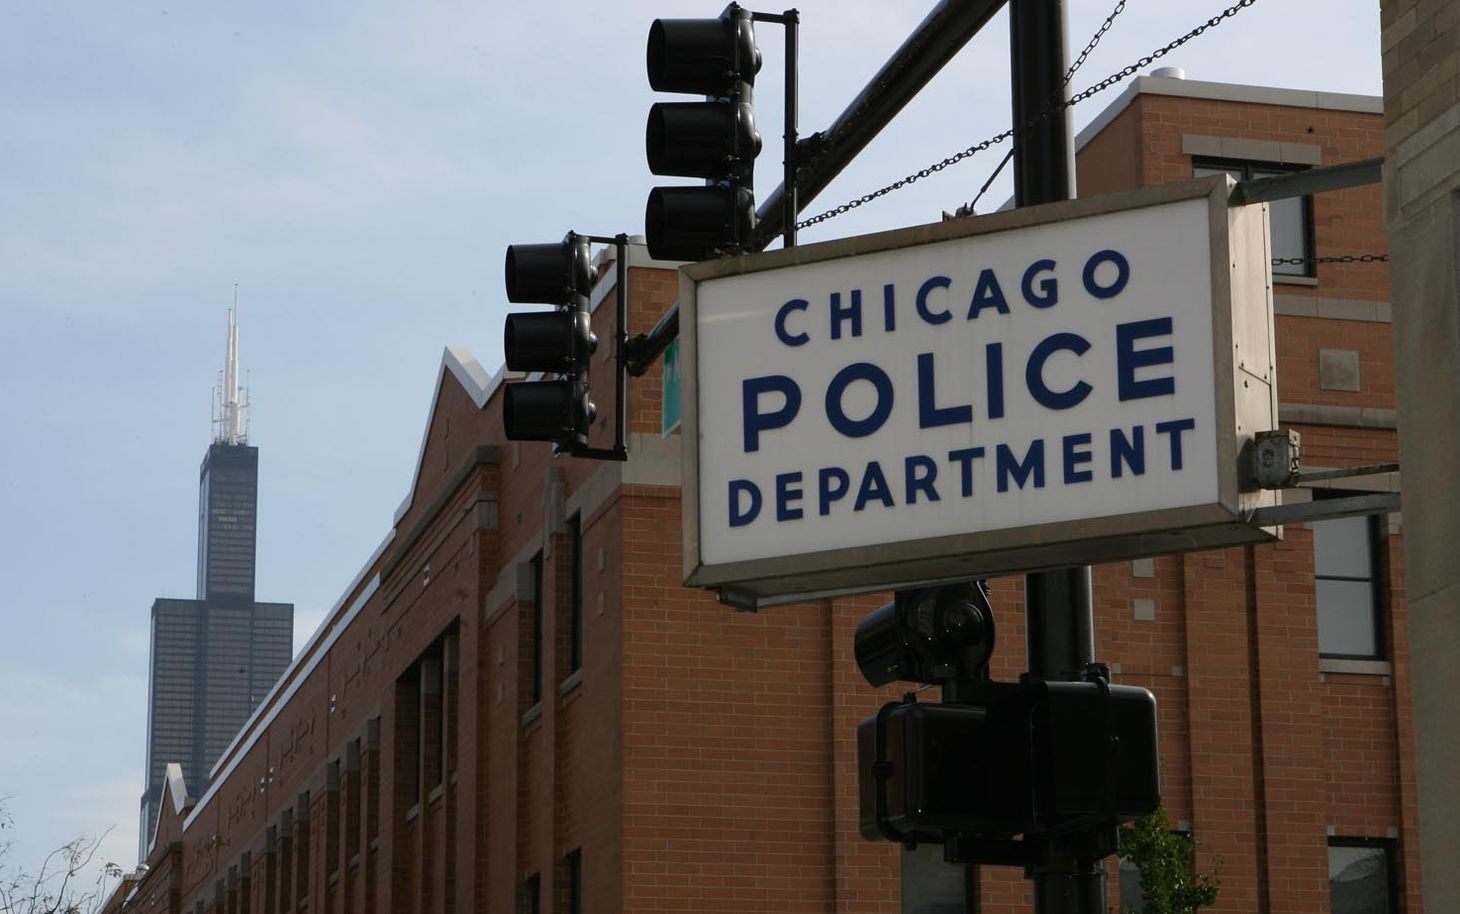 14-year-old girl, security guard seriously wounded in shooting outside Chicago school